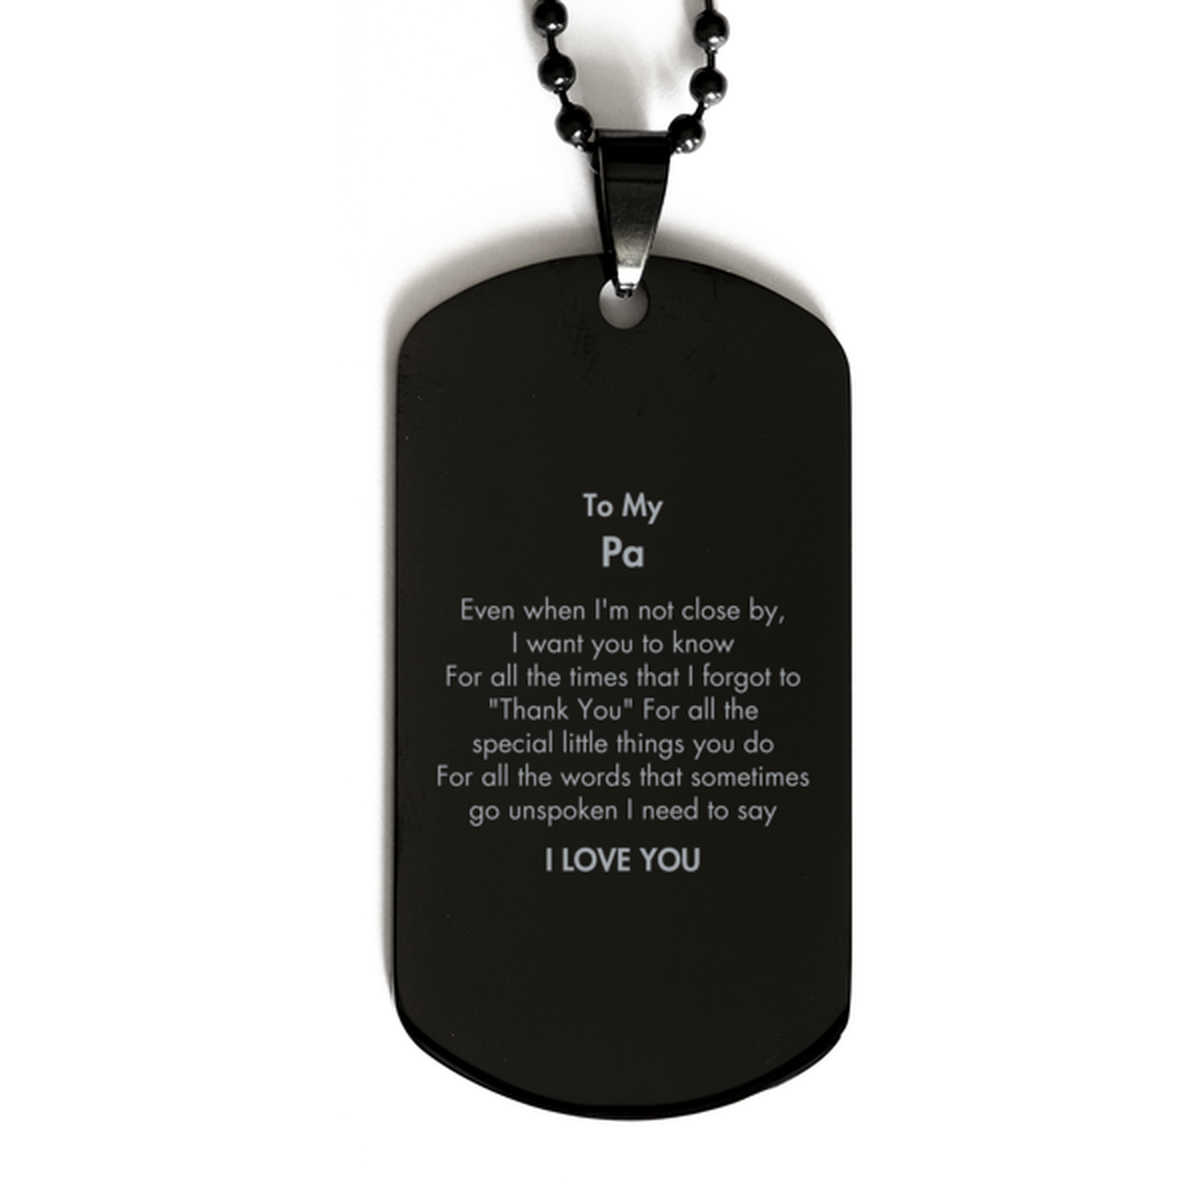 Thank You Gifts for Pa, Keepsake Black Dog Tag Gifts for Pa Birthday Mother's day Father's Day Pa For all the words That sometimes go unspoken I need to say I LOVE YOU